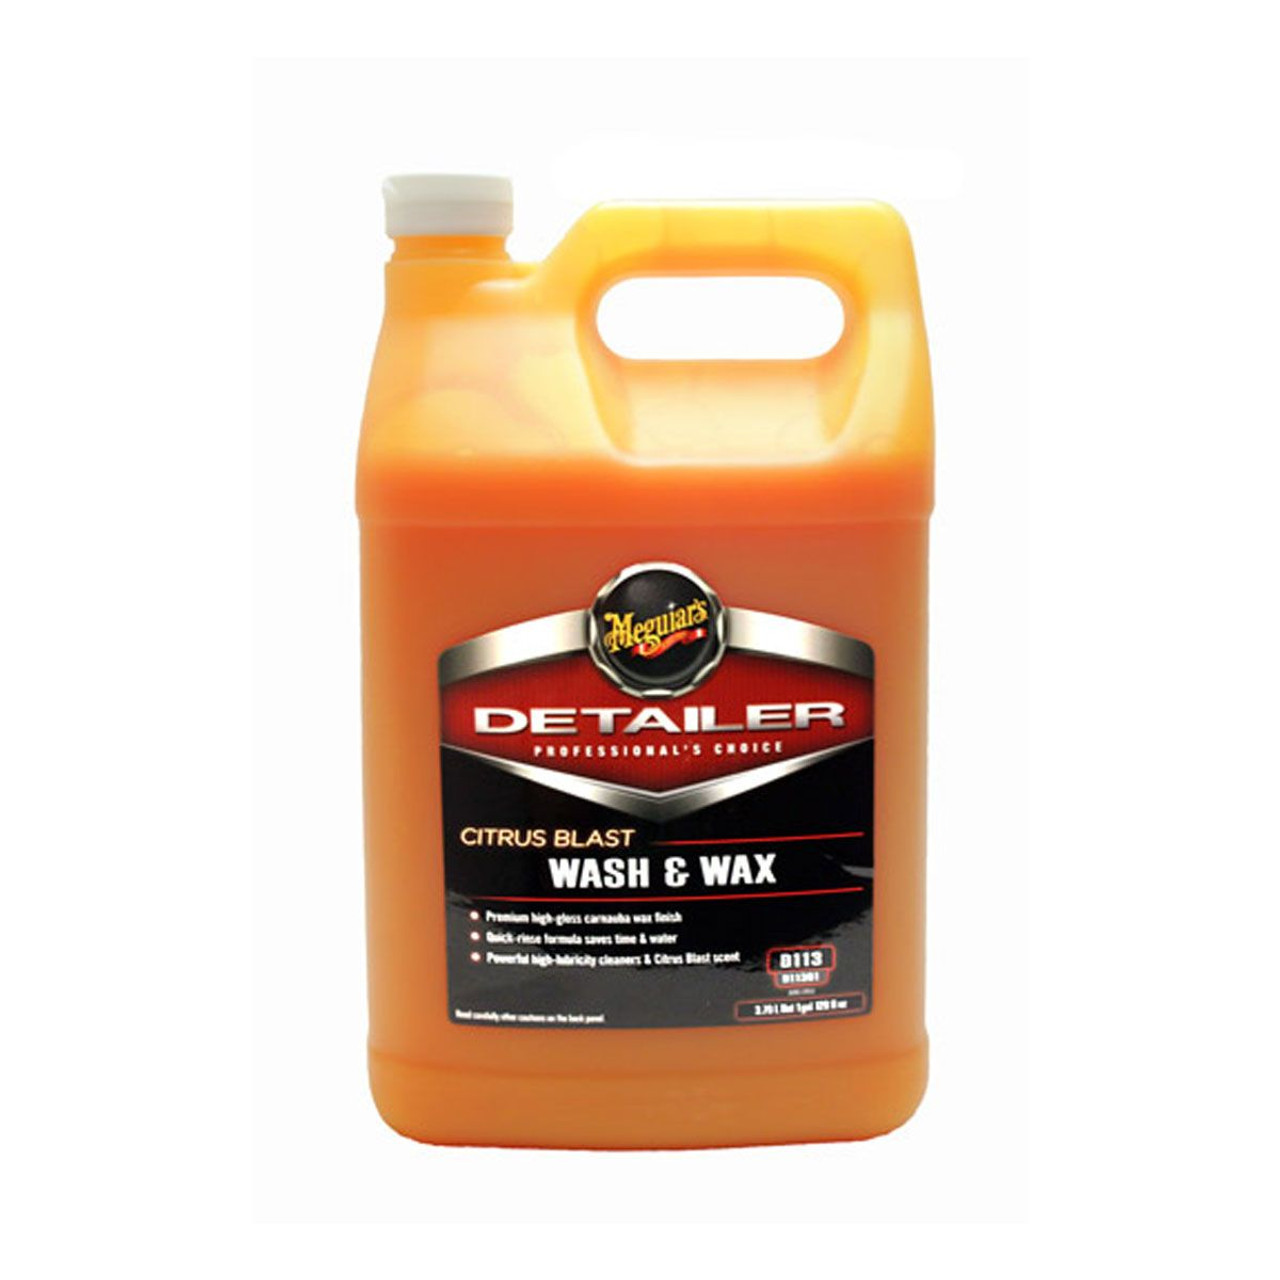 Meguiar's - Meguiar's® Citrus Blast Wash & Wax is formulated for fast and  efficient premium washes while providing additional gloss and Carnauba  protection. The high-lubricity cleaners work to clean your paint for